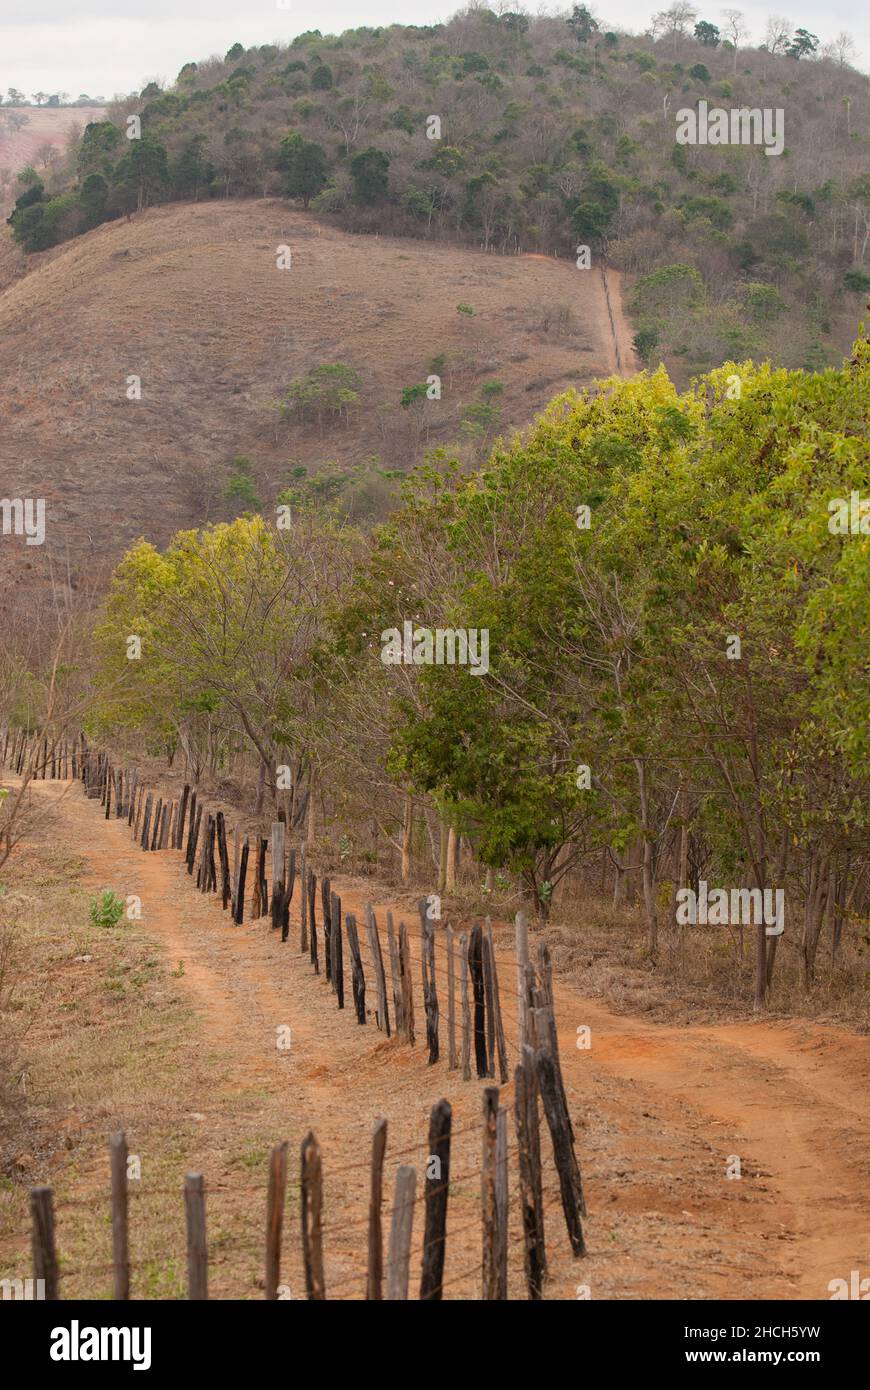 Border of protected area in Brazil's Atlantic Foreest, a highly endangered habitat, showing the pressure on the remaining forest right up to the fence. Stock Photo